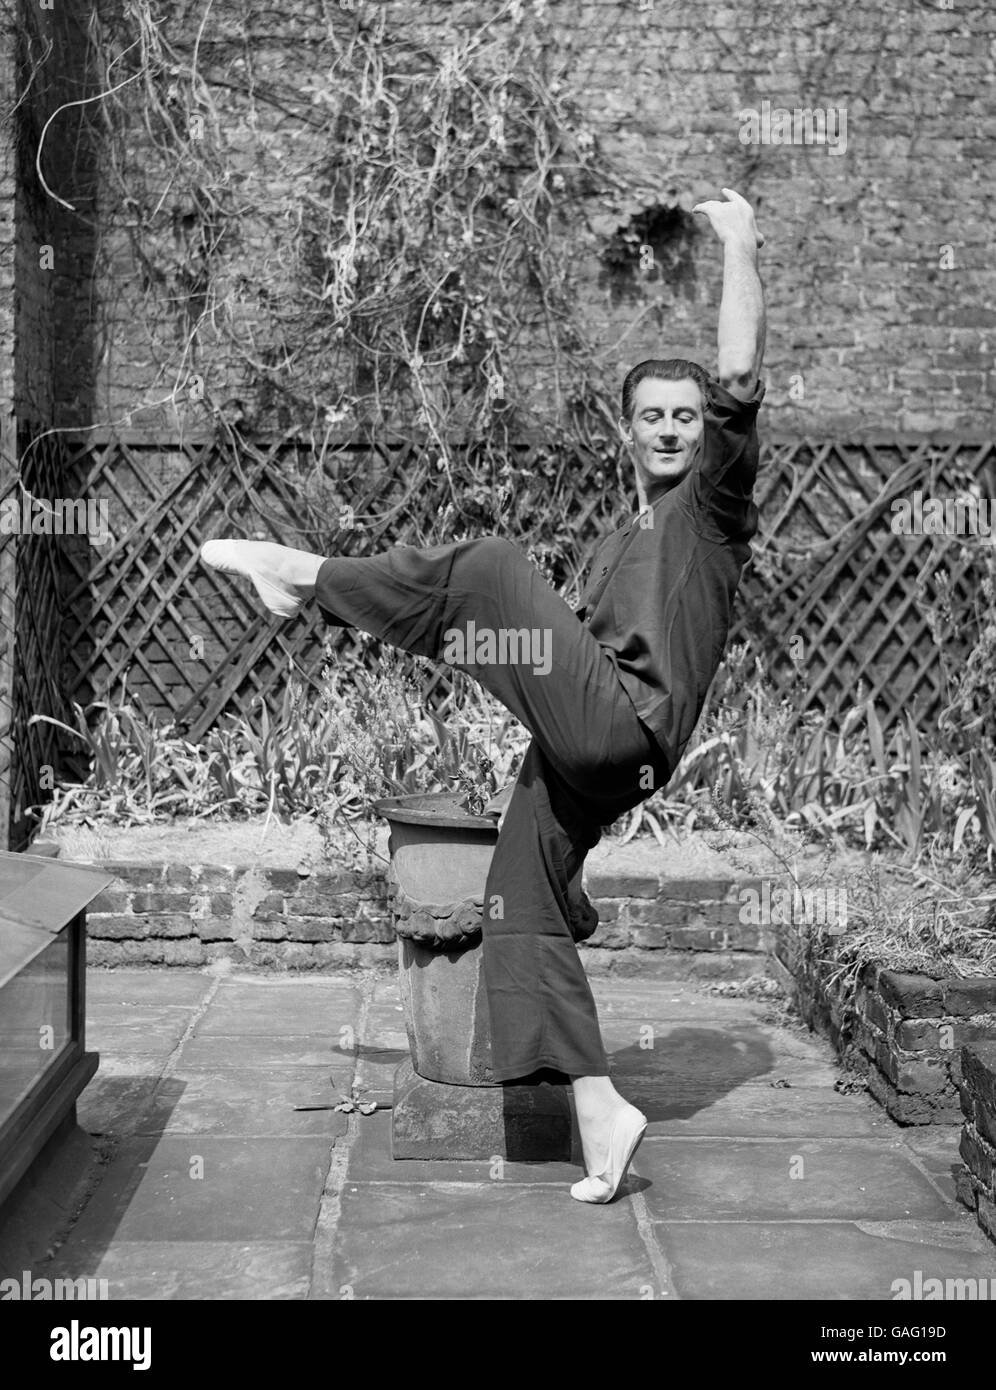 Ballet dancer Anton Dolin, flexing his muscles on the terrace of his London home, after flying back from Cannes, where he was beaten up and robbed. The beating up was received at the hands of a notorious Riviera bandit whom the French police had been hunting for two years. Dolin was able to identify him, leading to his arrest. Stock Photo